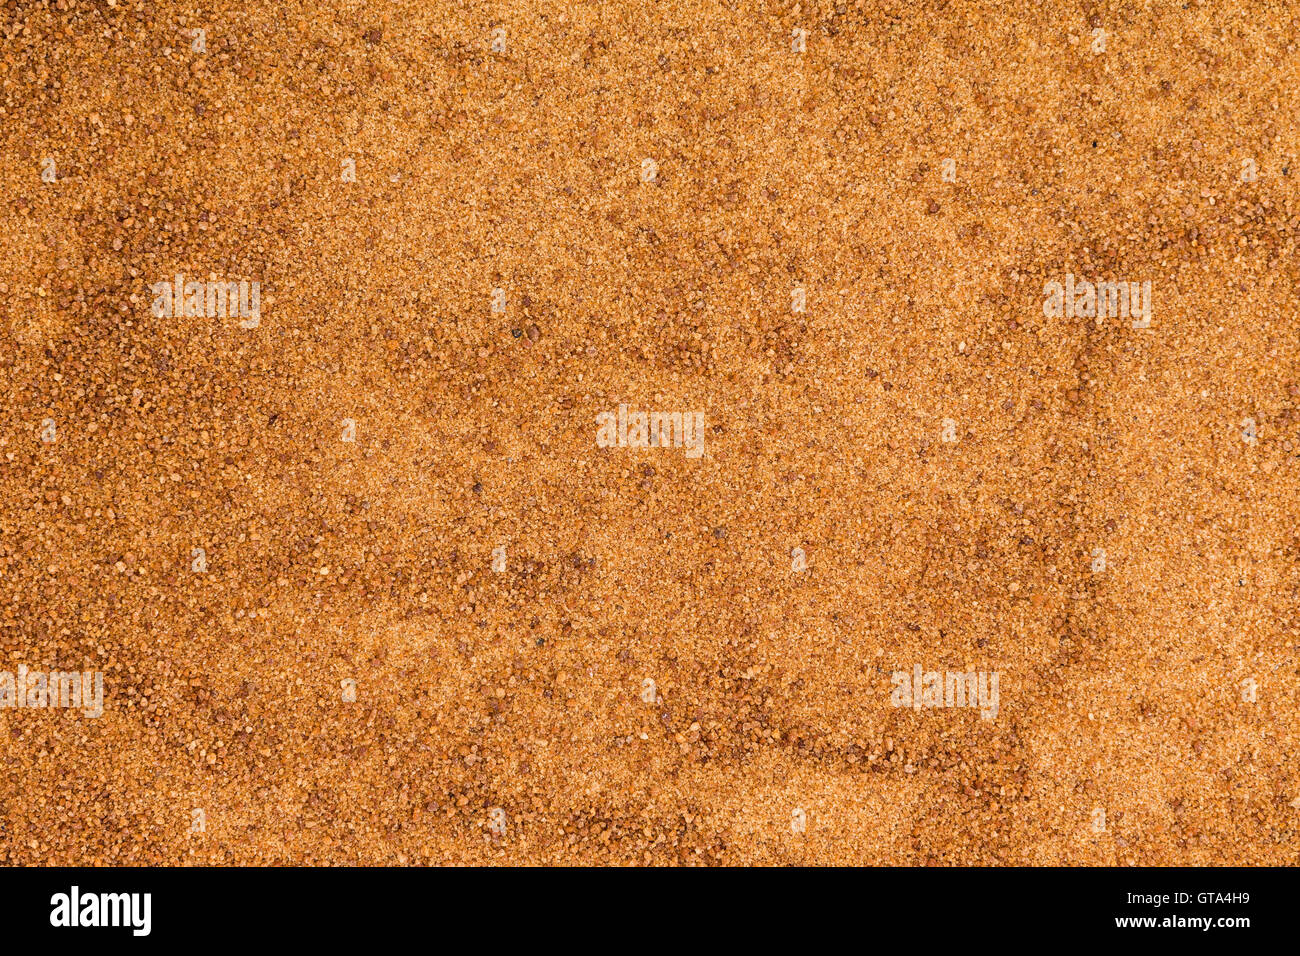 Background texture of organic coconut sugar made from the crystallized sap of cut flower buds on the coconut palm and used as a Stock Photo